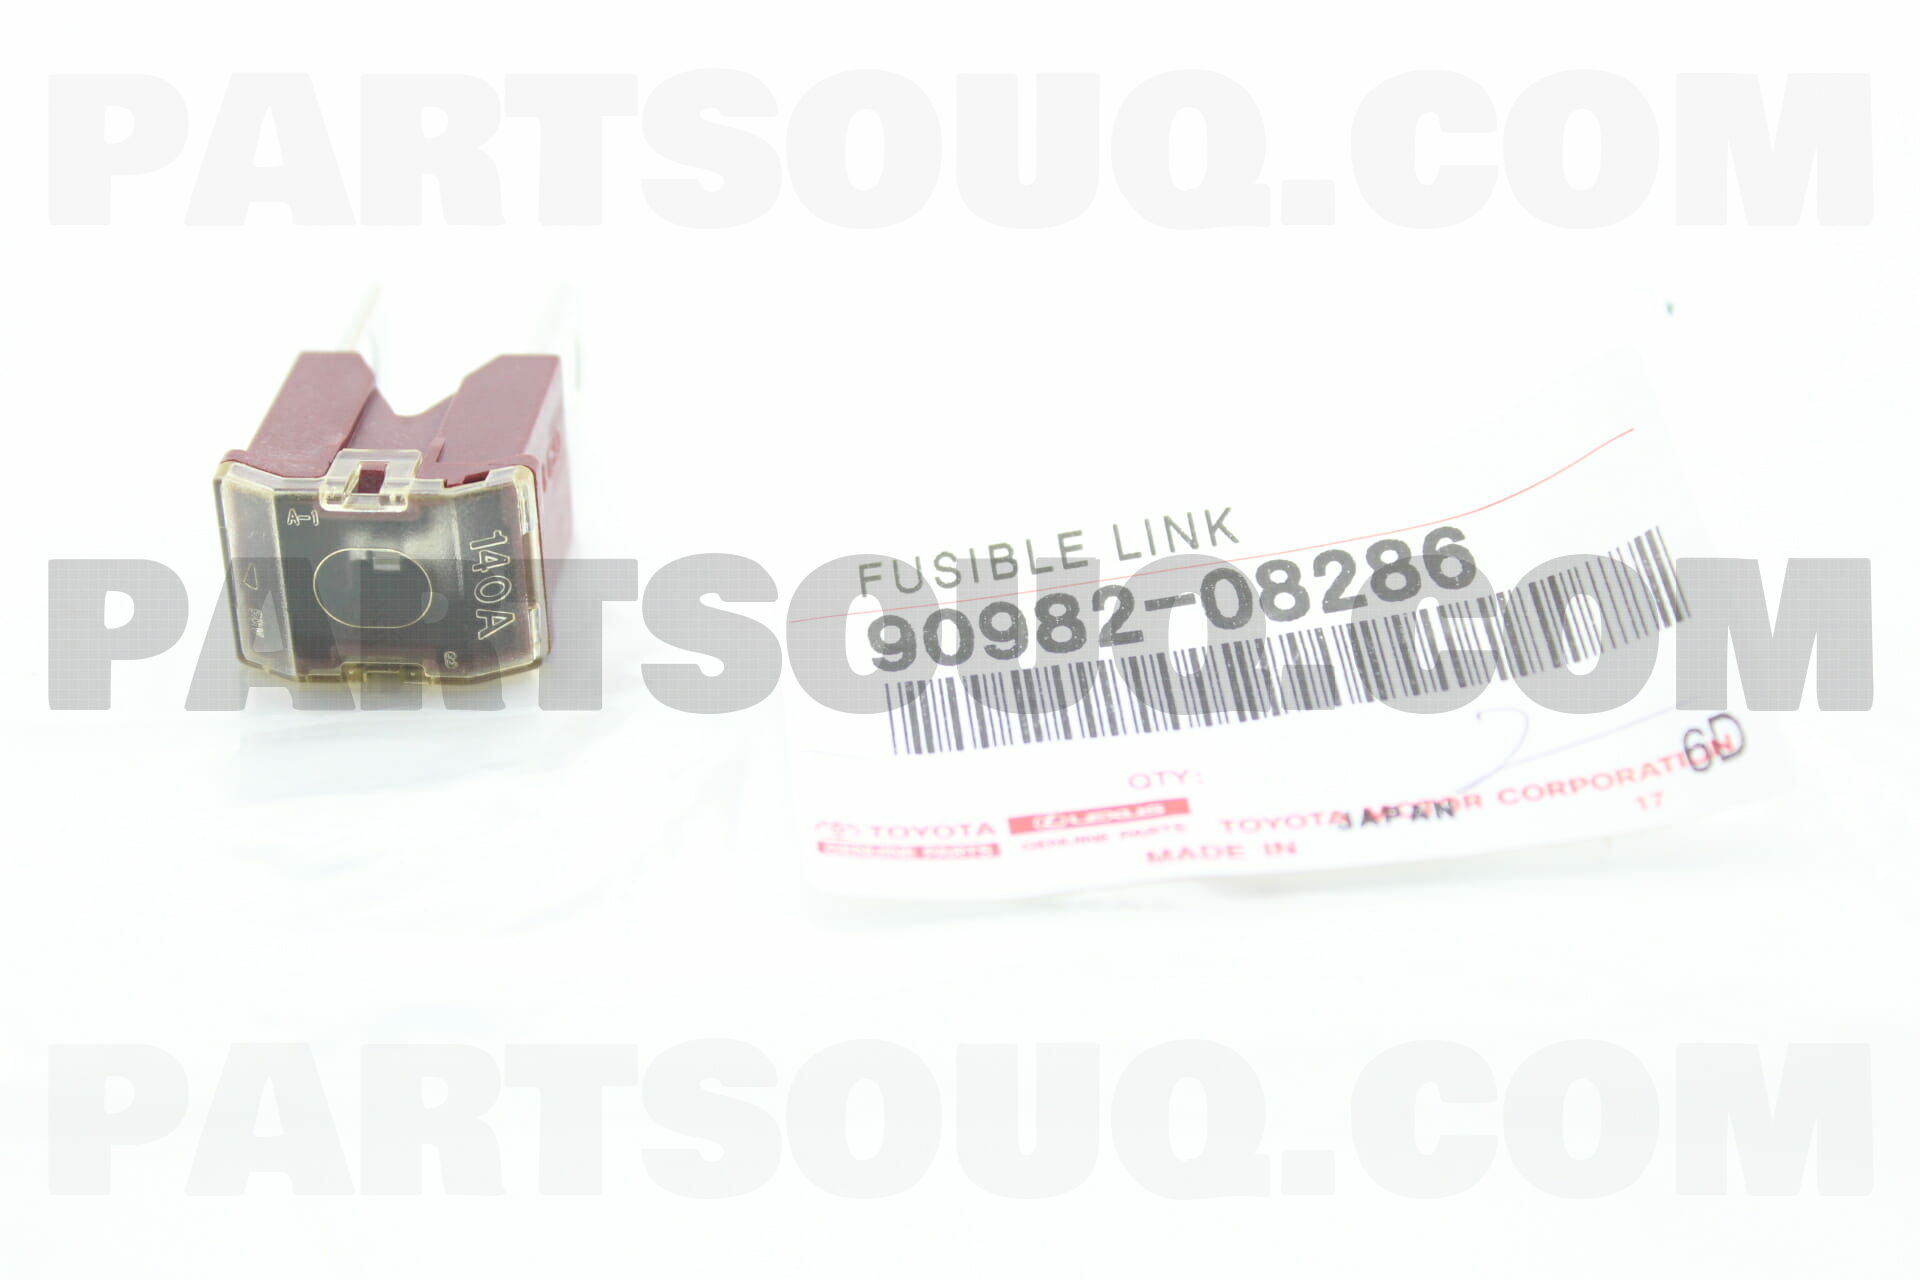 Genuine Toyota 90982-08286 Fusible Link 